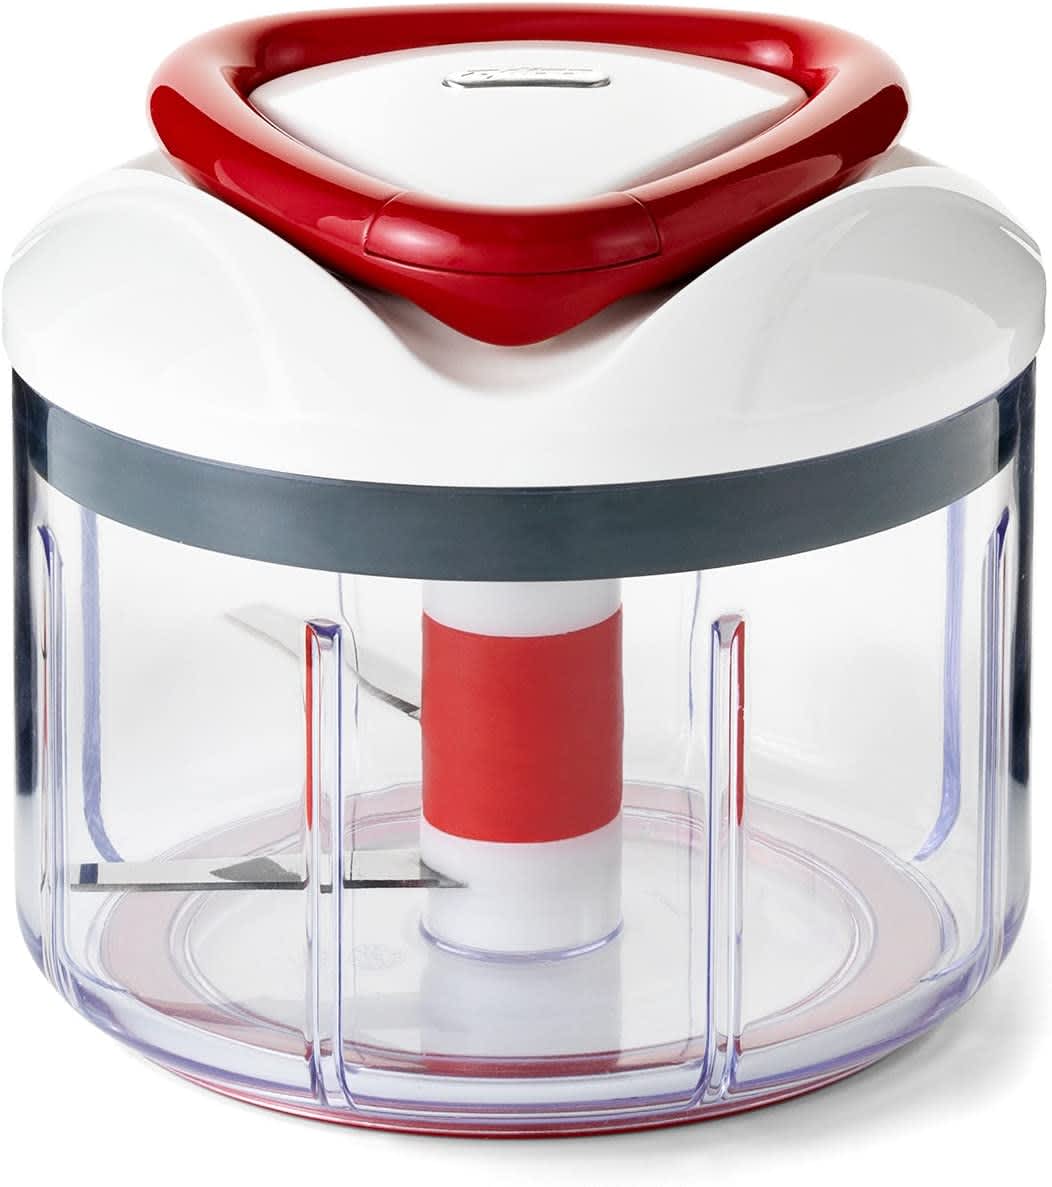 https://cdn.apartmenttherapy.info/image/upload/v1631629966/gen-workflow/product-database/ZYLISS_Easy_Pull_Food_Chopper_and_Manual_Food_Processor.jpg